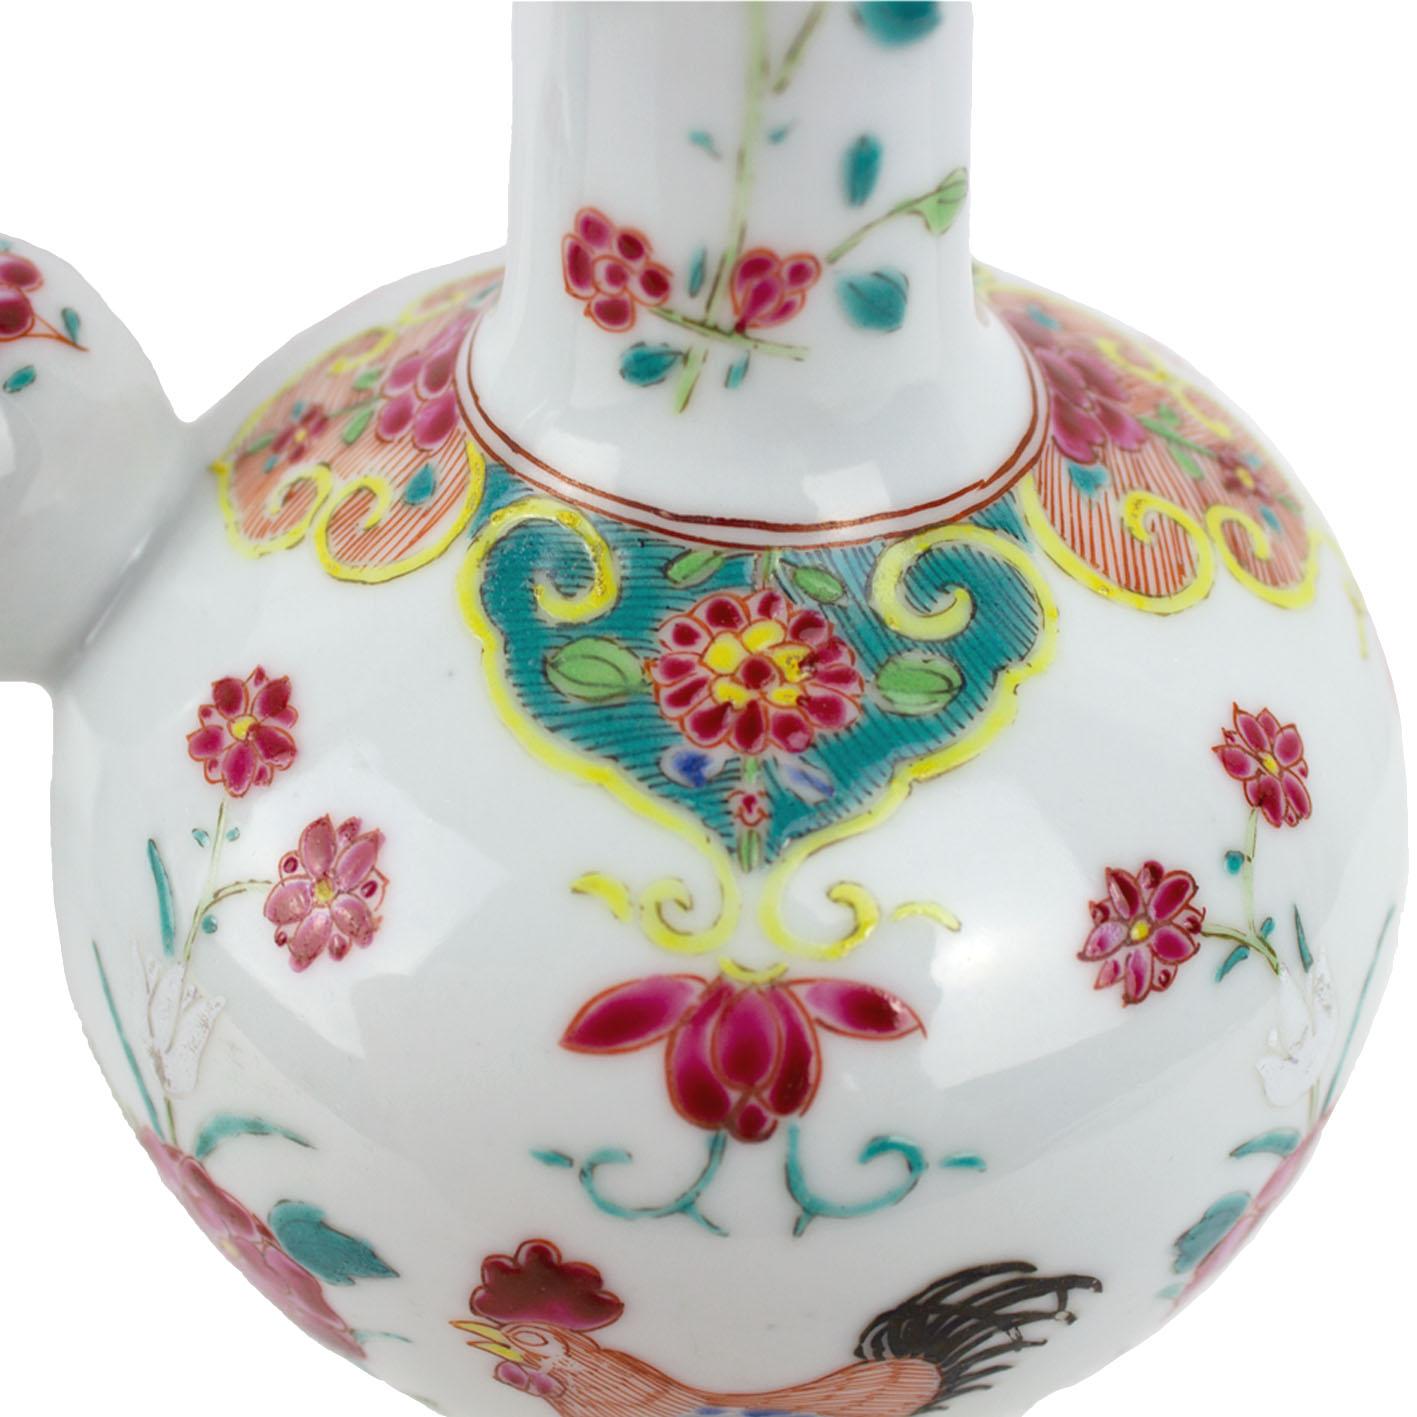 A Chinese porcelain pair of kendis, East India Company, Qianlong Period (1736-1795). Polychrome Famille Rose decoration depicting floral motifs and a cock in the middle of both sides. It’s rare to find Chinese porcelain Ain with this animal